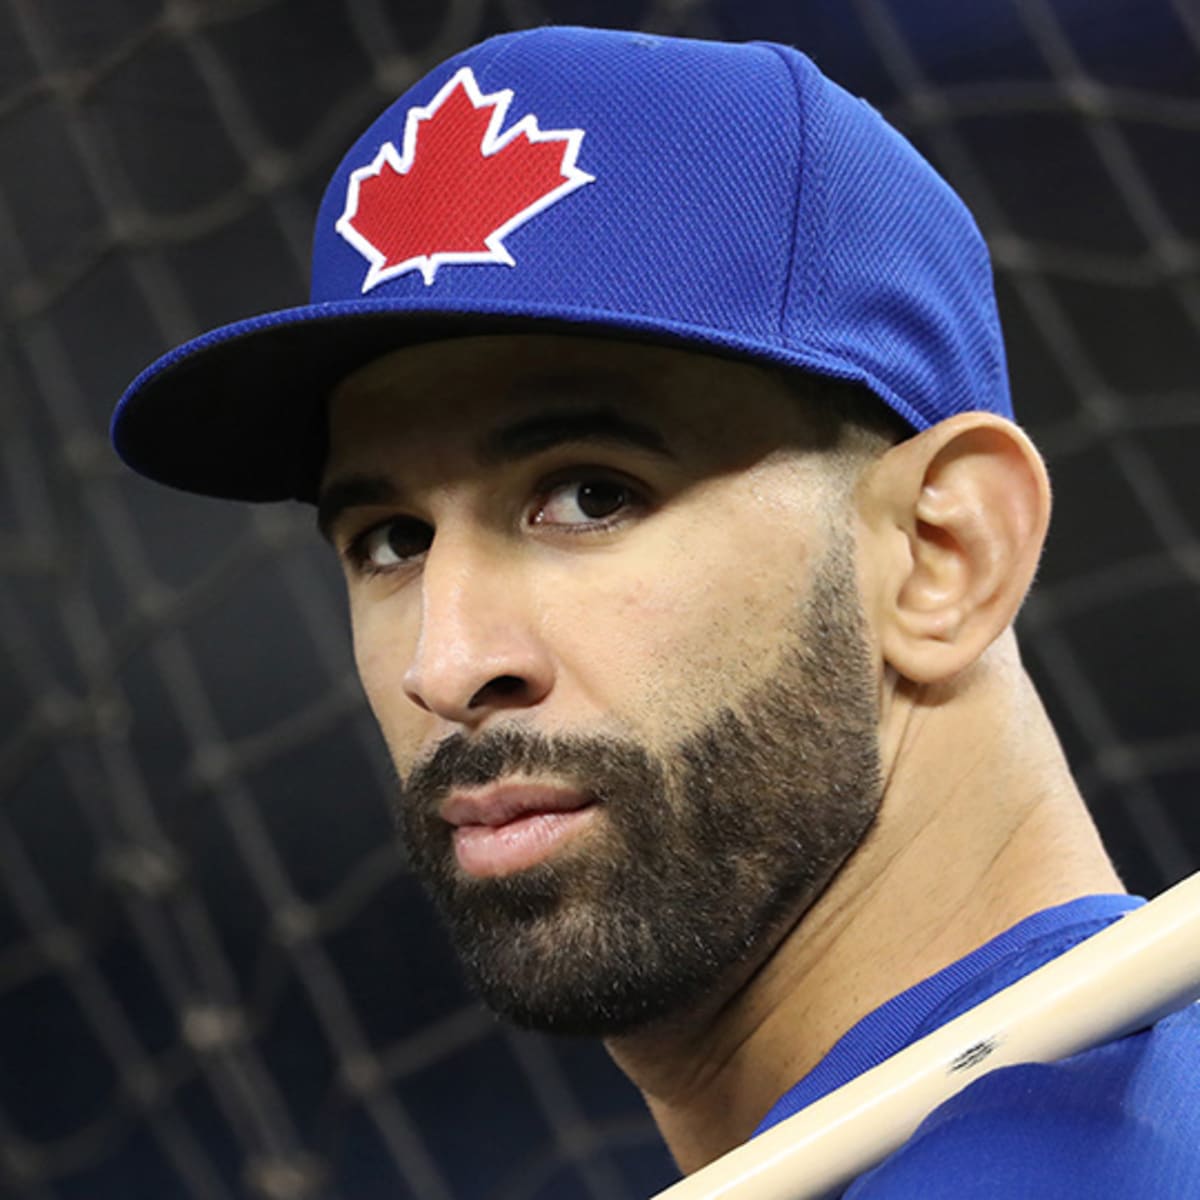 Jose Bautista Deal a Head-Scratcher for Blue Jays - Last Word On